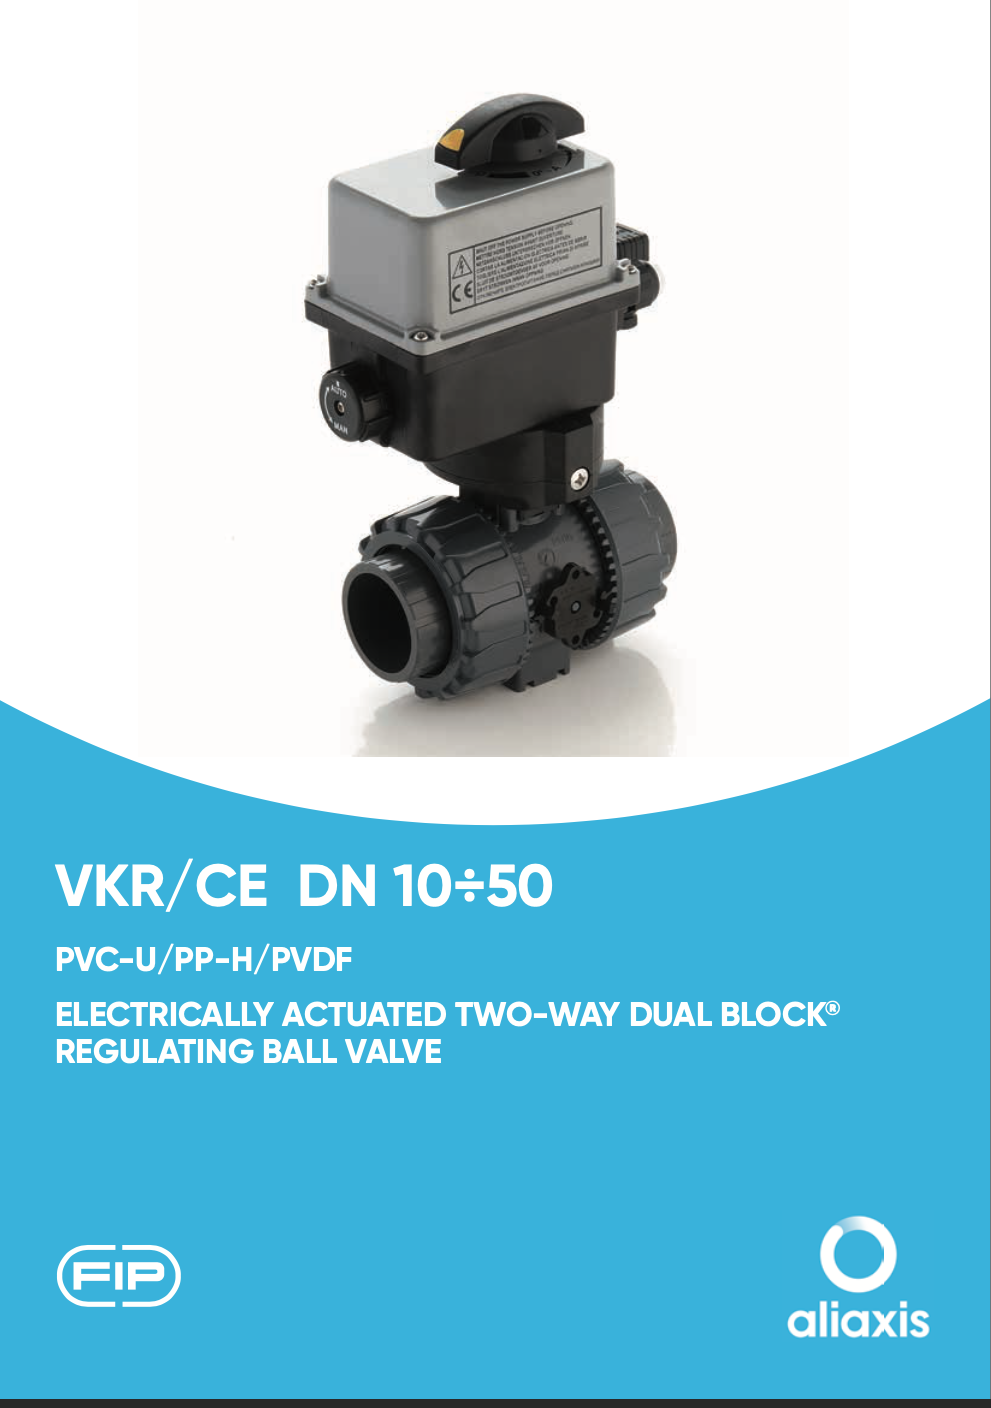 VKR CE DN 10-50 Technical Catalogue